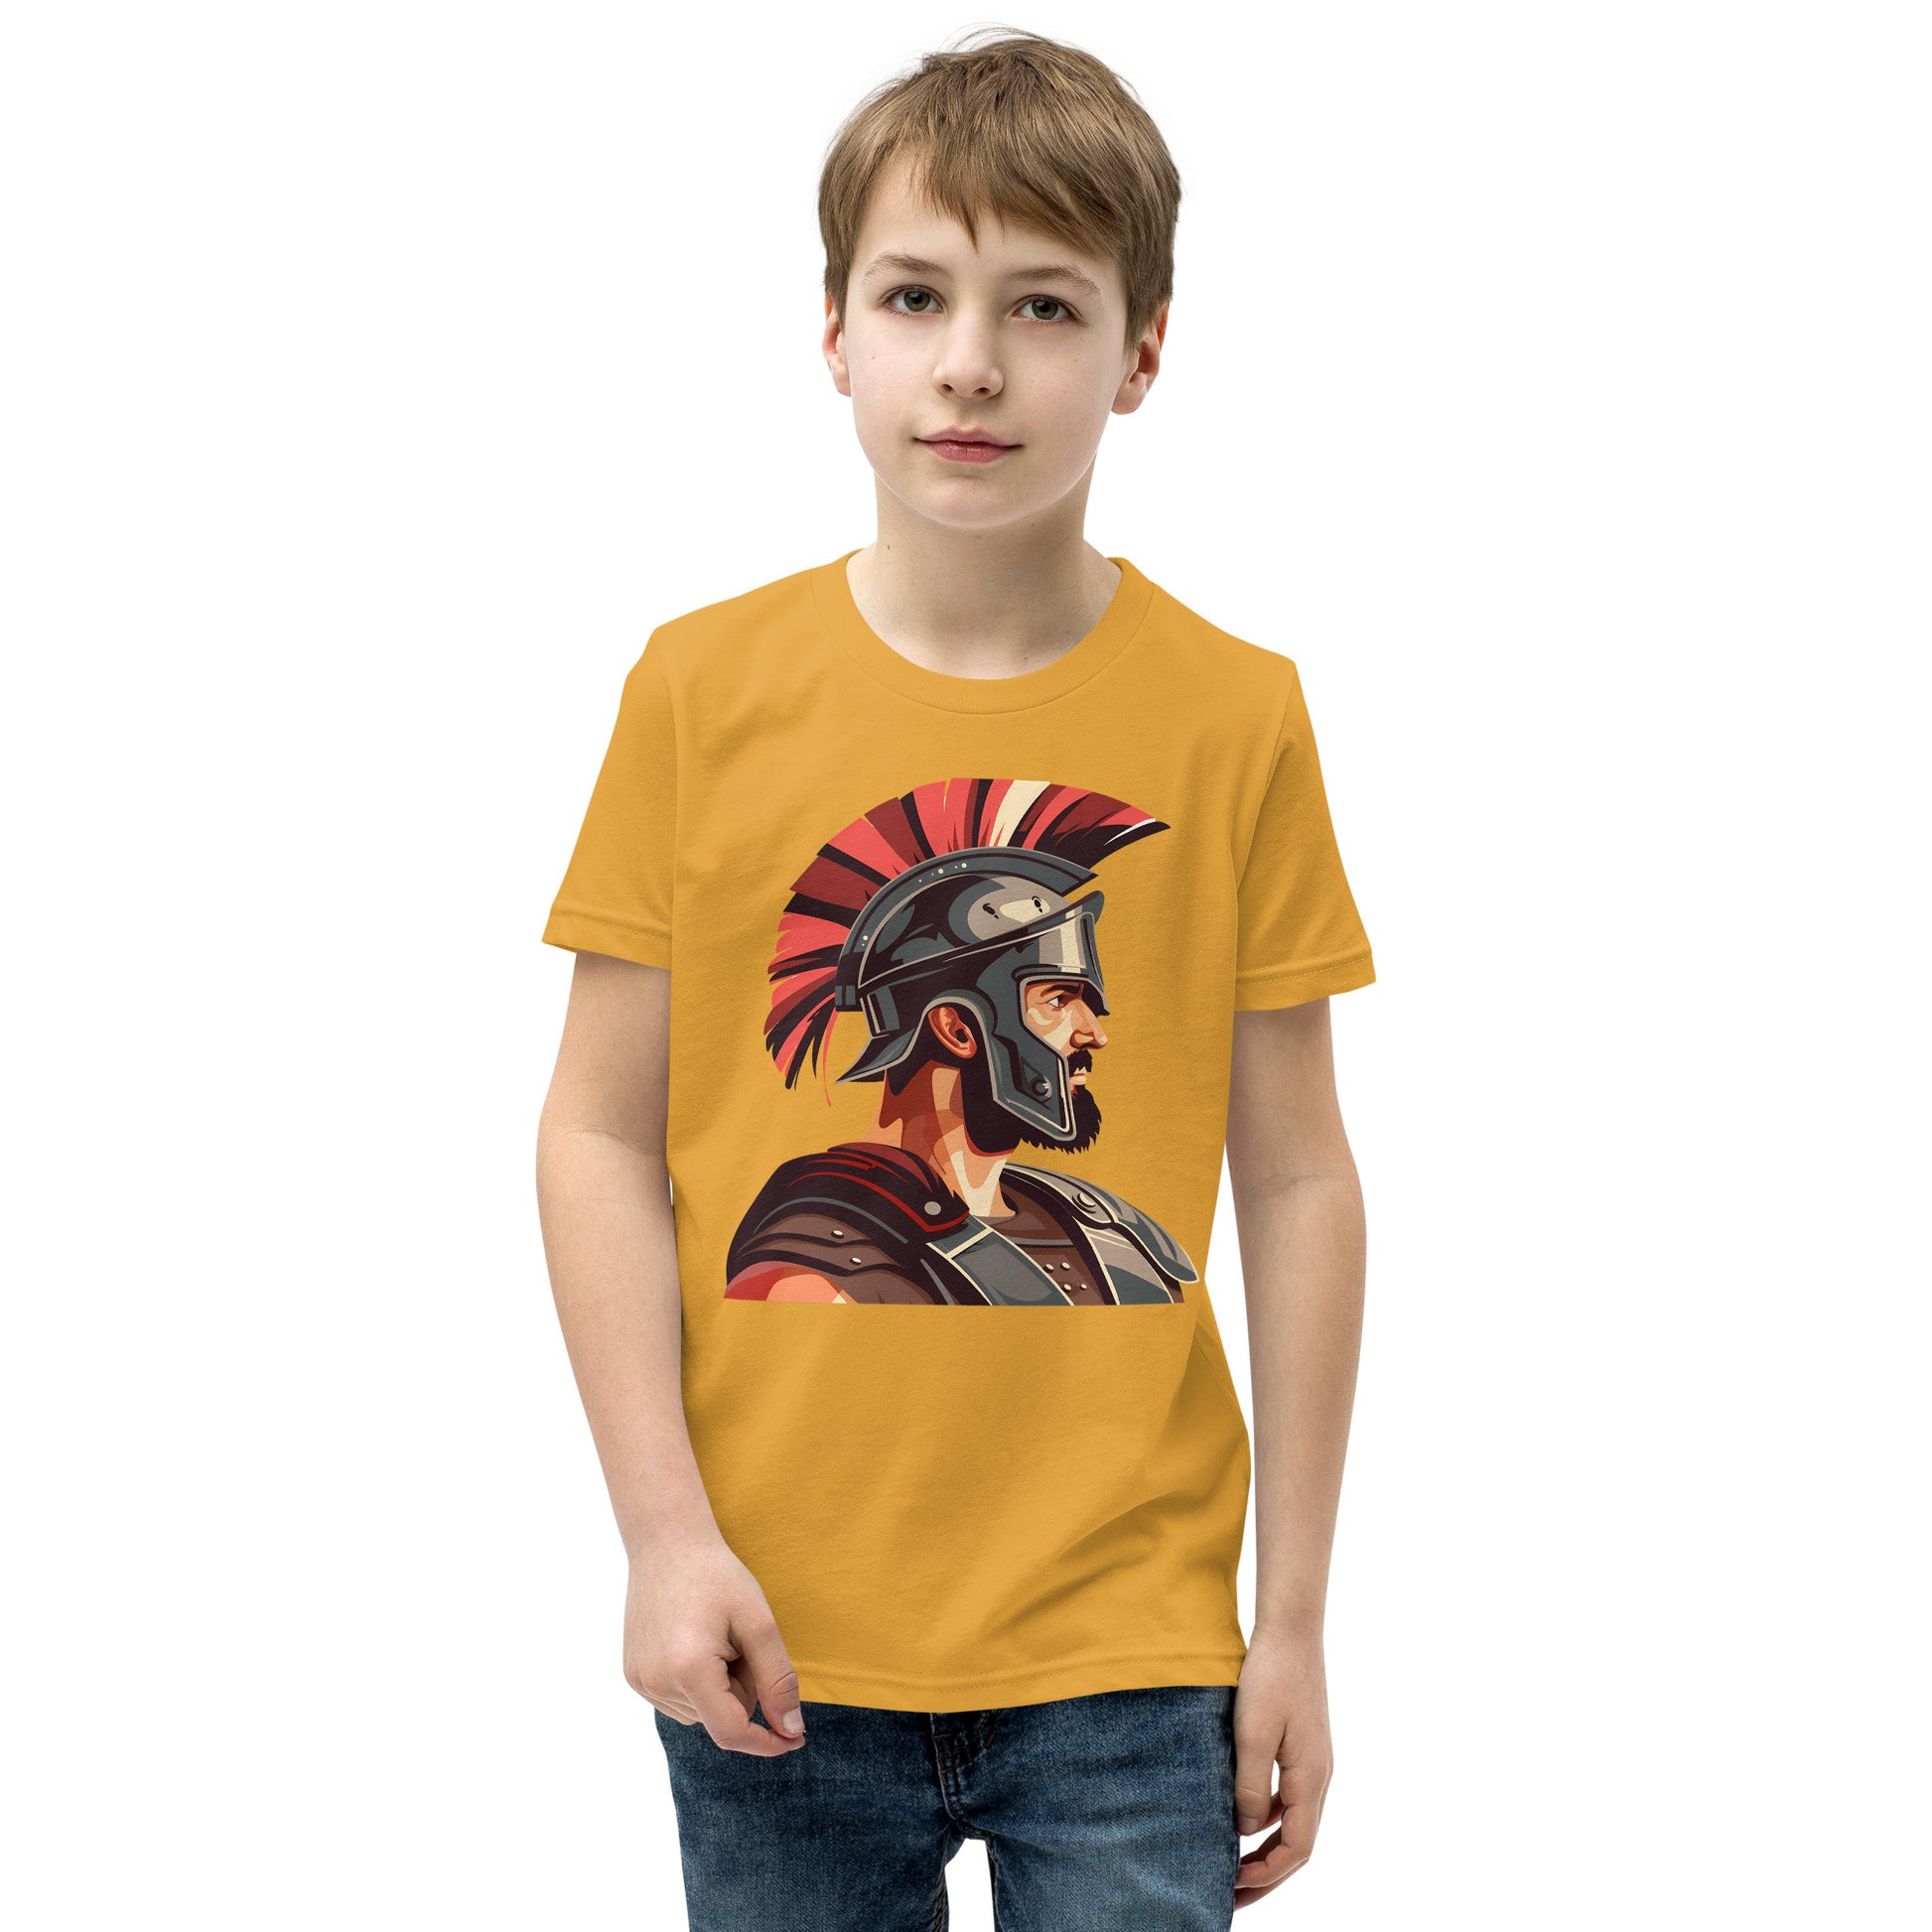 Teenager with a mustard T-shirt with a print of a warrior